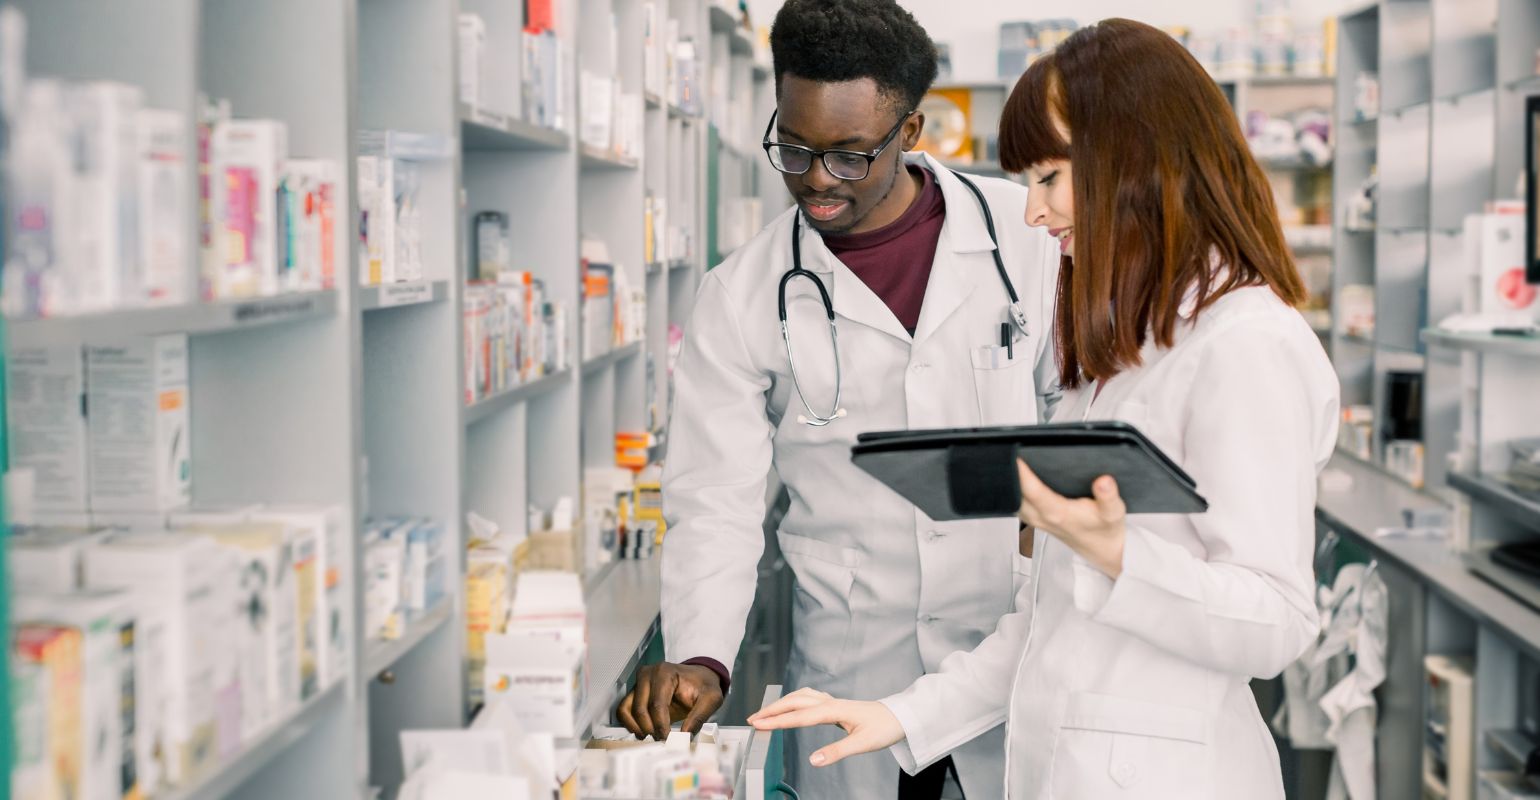 Why ePharmacy has not attained its full potential